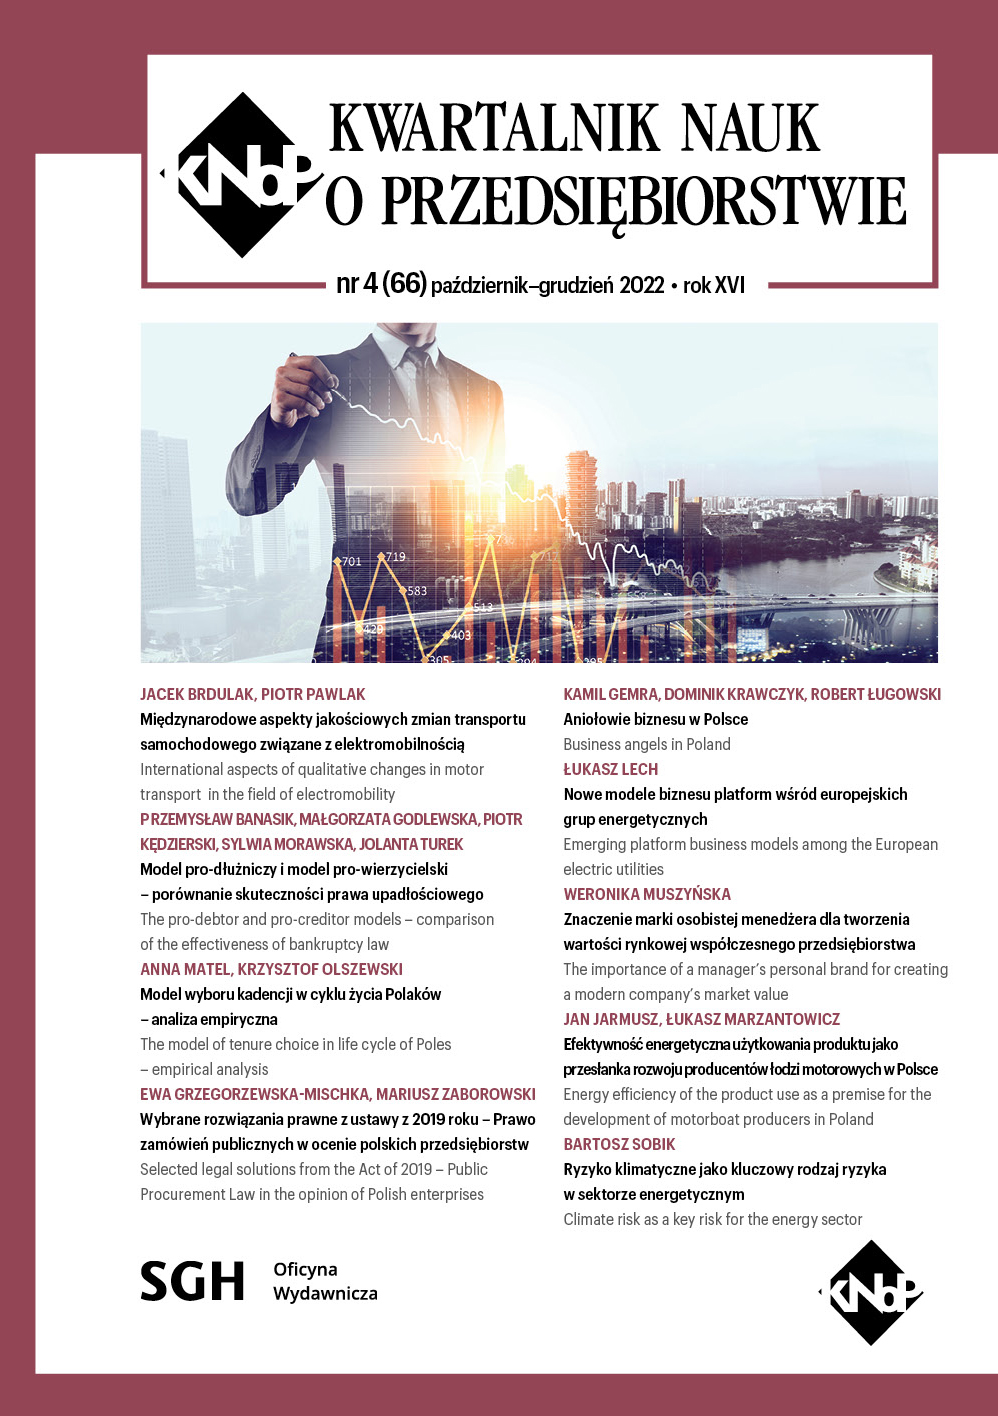 Selected legal solutions from the Act of 2019 – Public Procurement Law in the opinion of Polish enterprises Cover Image